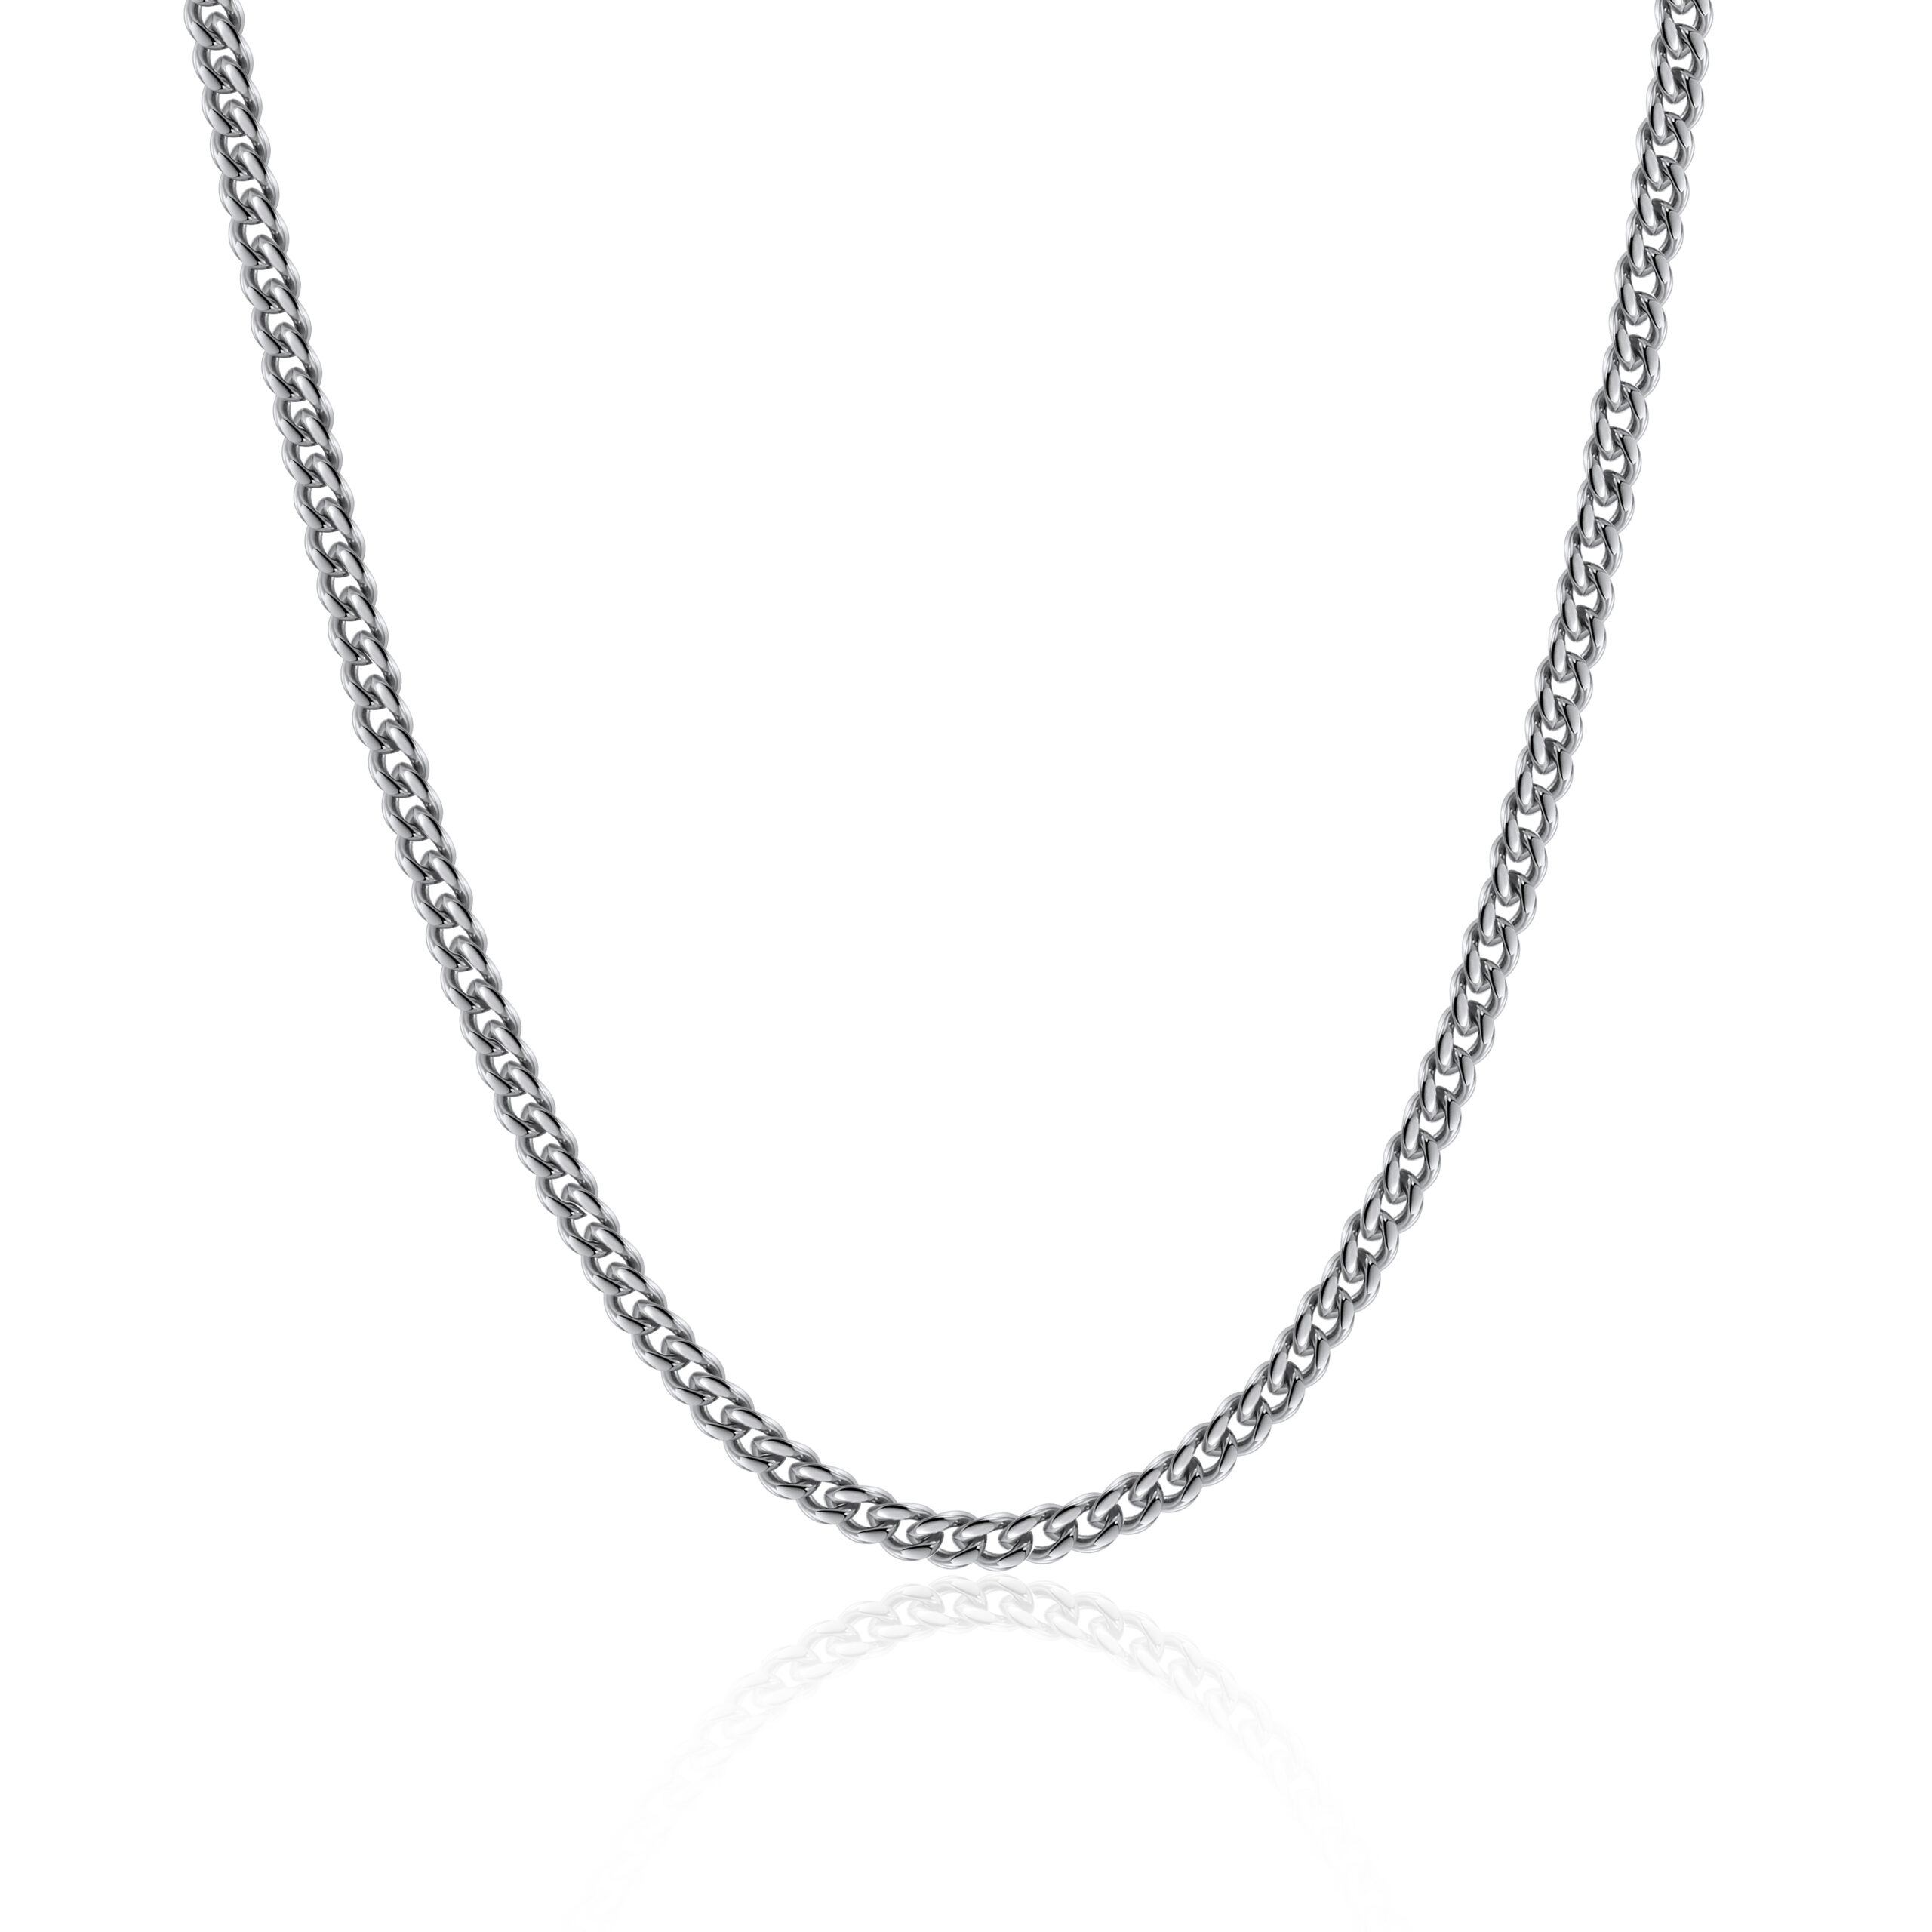 fcity.in - Trendy And Gorgeous Alloy Mangalsutra Micro Thin Necklace Chain  For